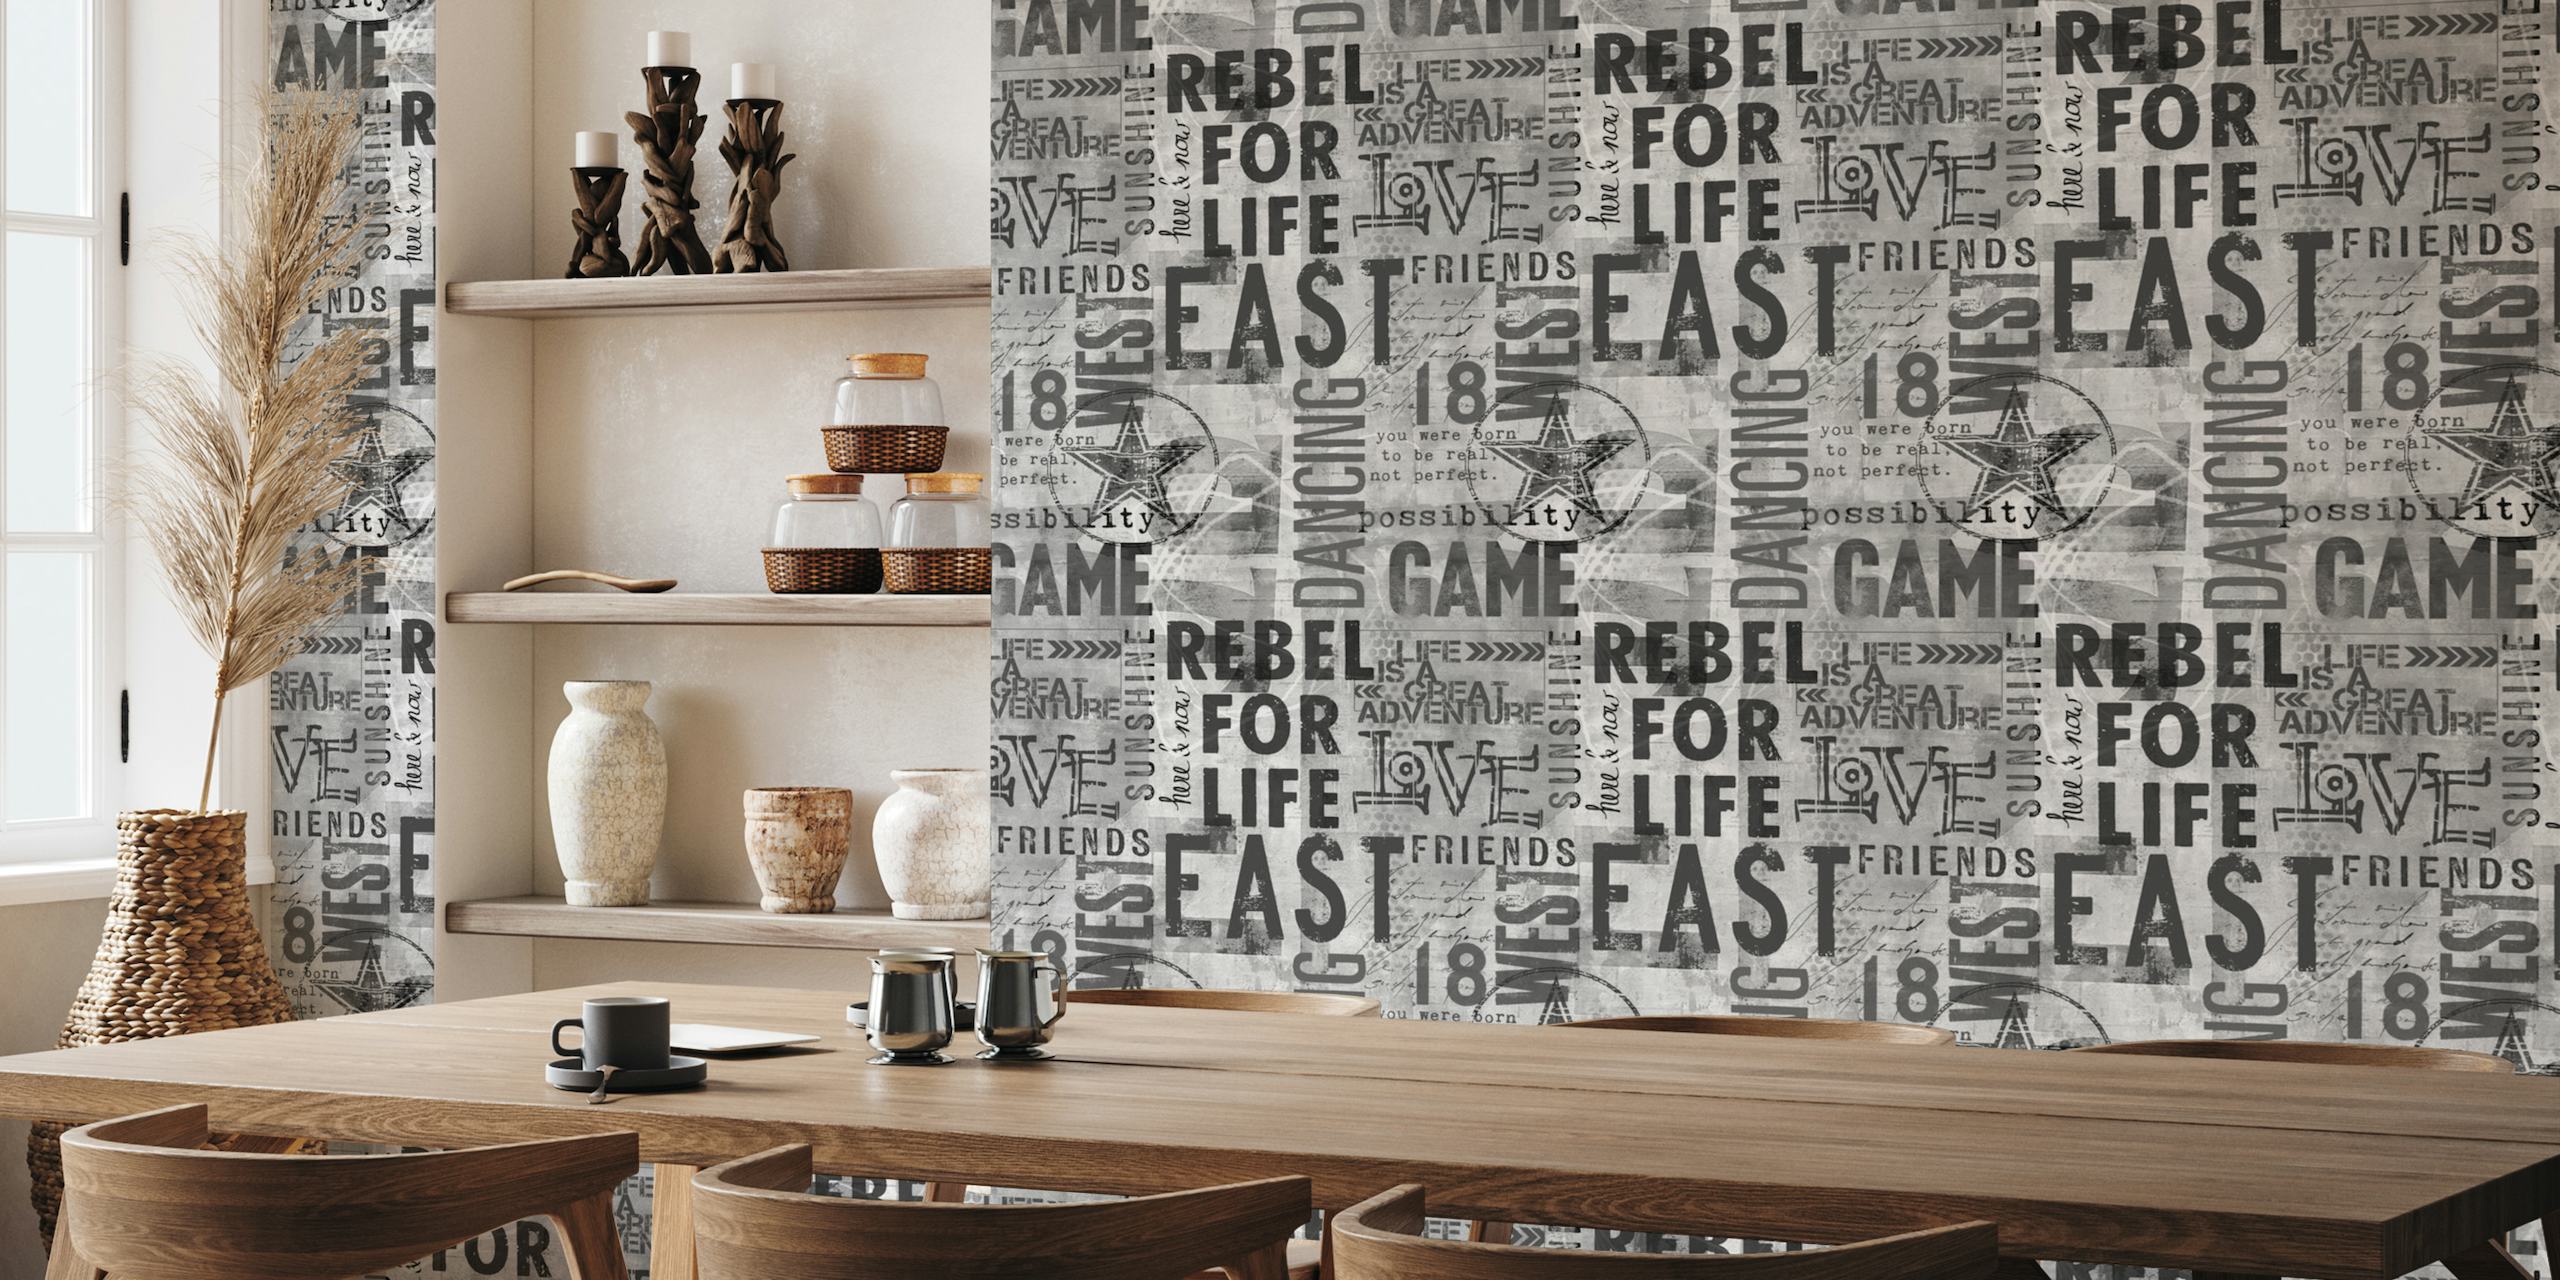 Monochrome urban-themed grunge typography art wall mural featuring words like 'REBEL', 'GAME', 'ADVENTURE', and 'FRIENDS'.